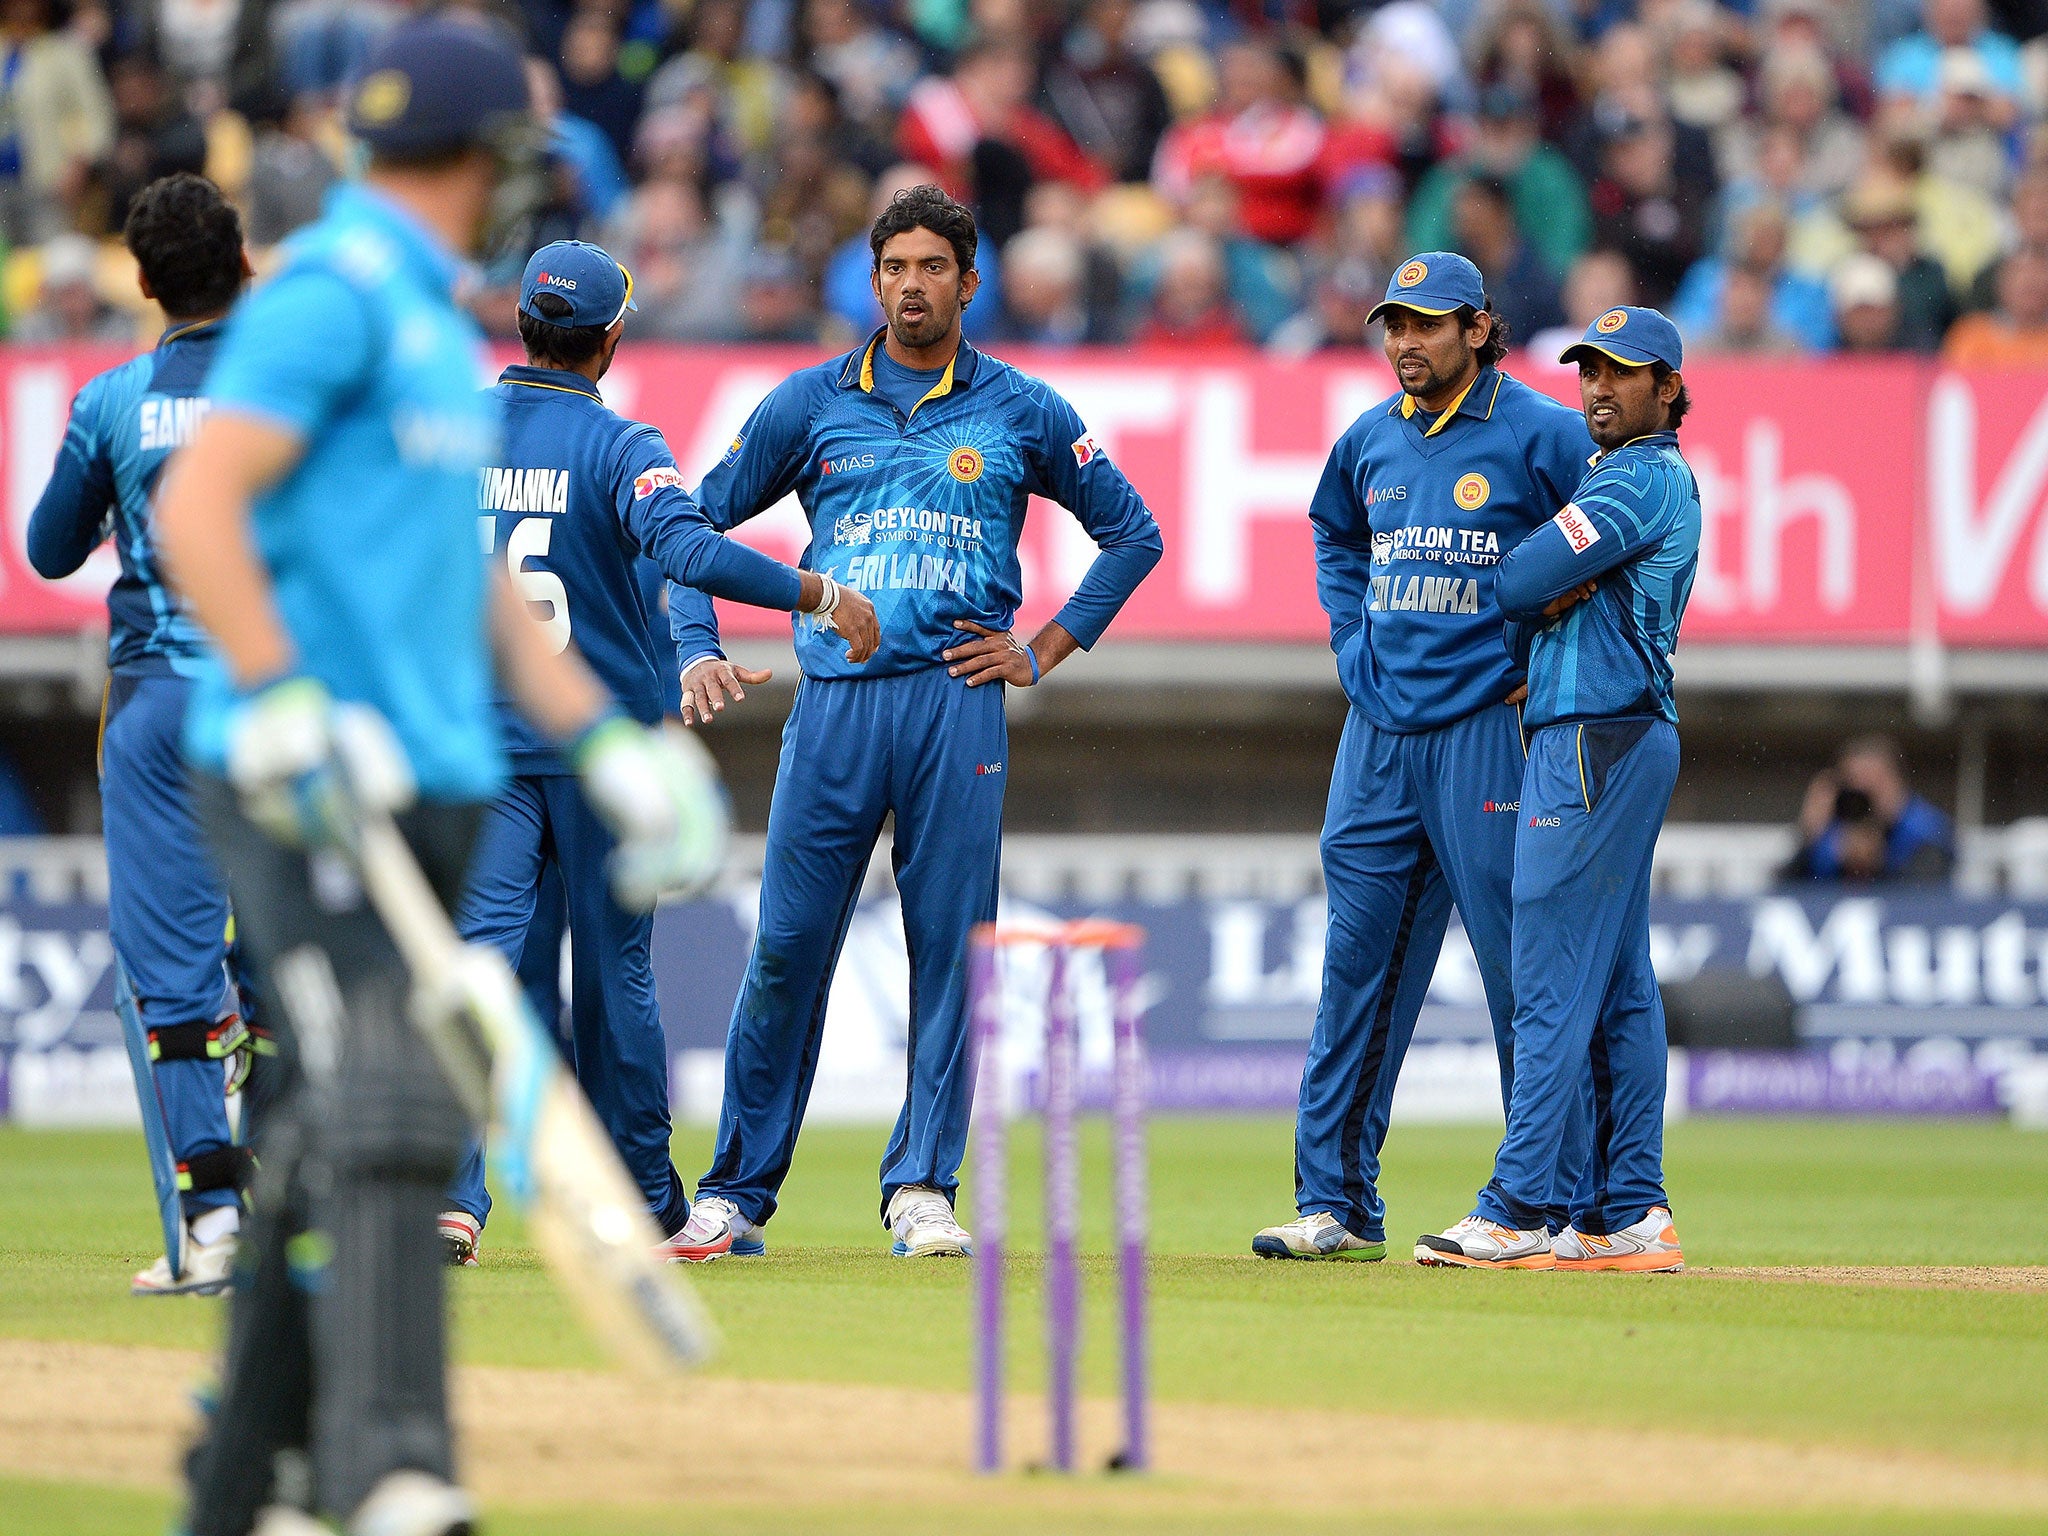 Sri Lanka's Sachithra Senanayake (3R) reacts after controversially running out England's Jos Buttler (L) during the fifth ODI at Edgbaston